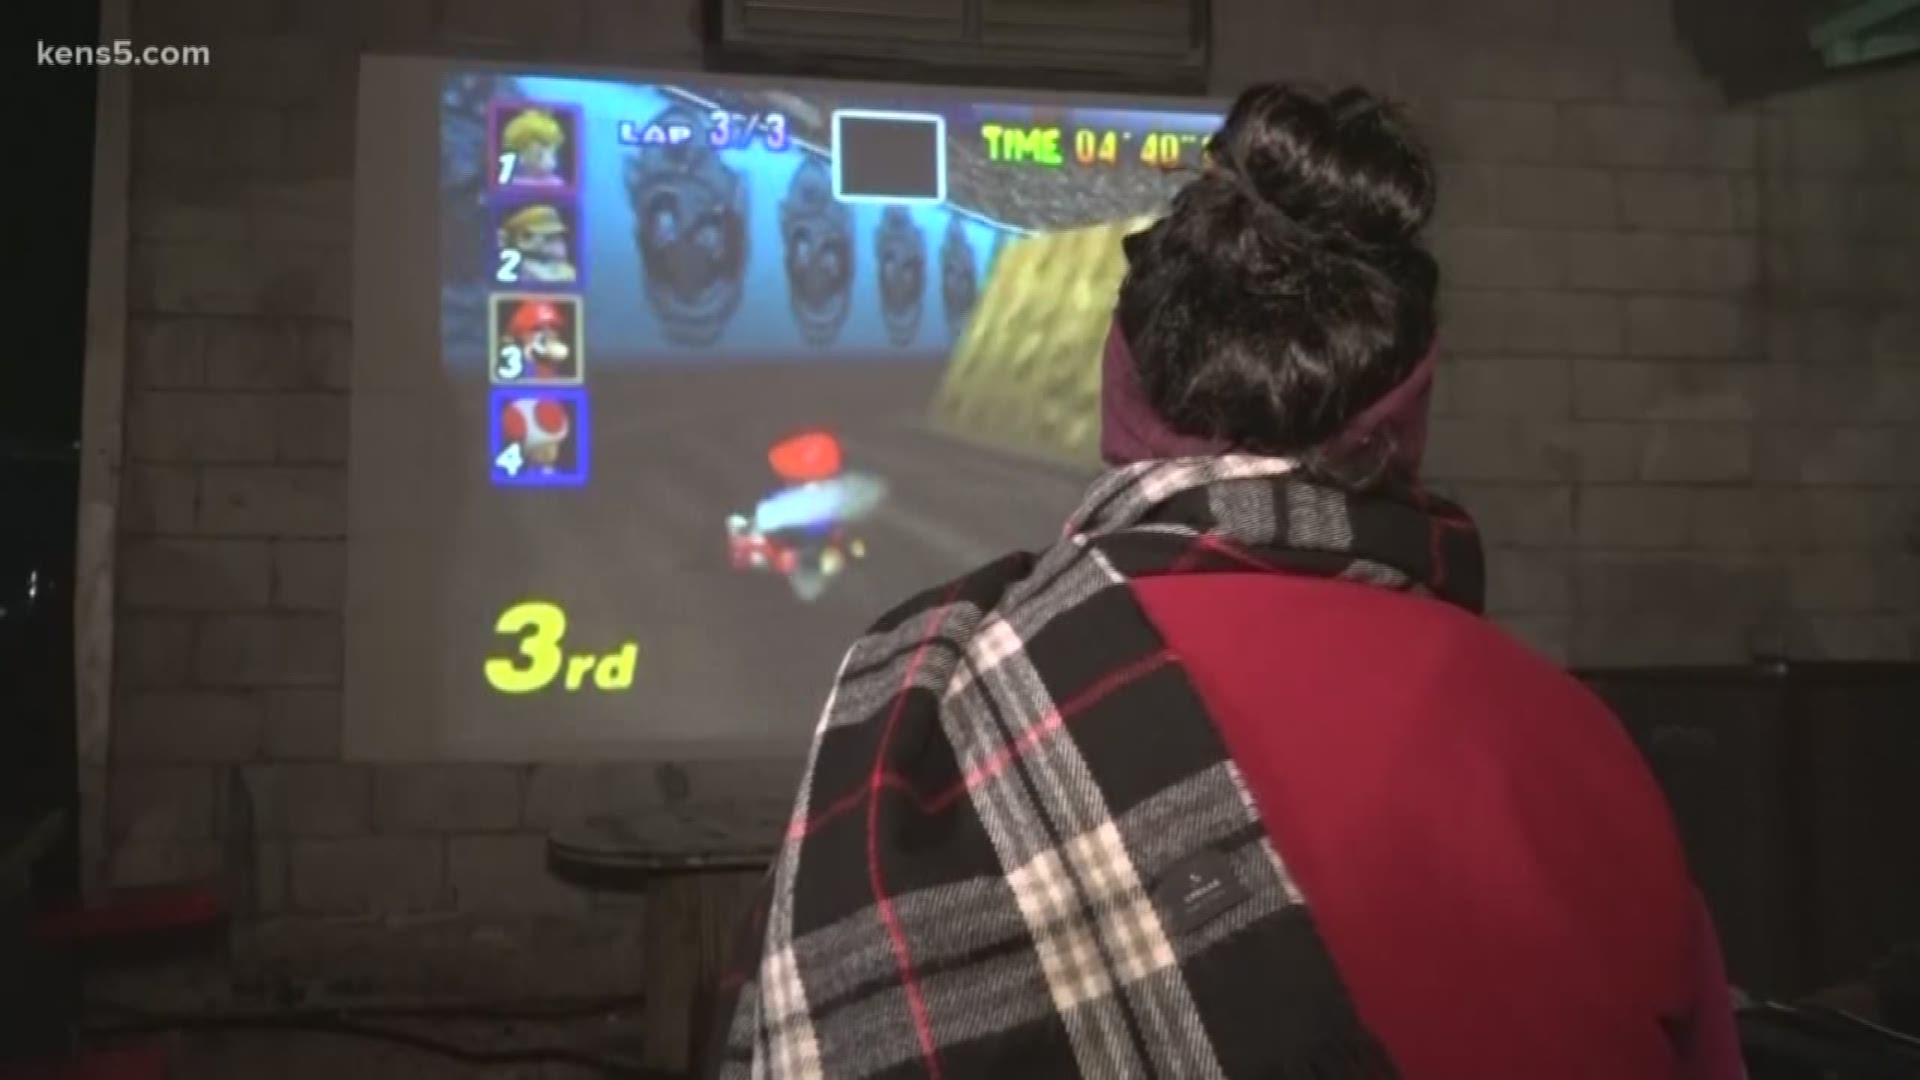 Gamers are excited to hear that they can get their whole bodies into one of their favorite childhood games. Eyewitness News reporter Jon Coker shows us how Mario Kart is coming to Texas.